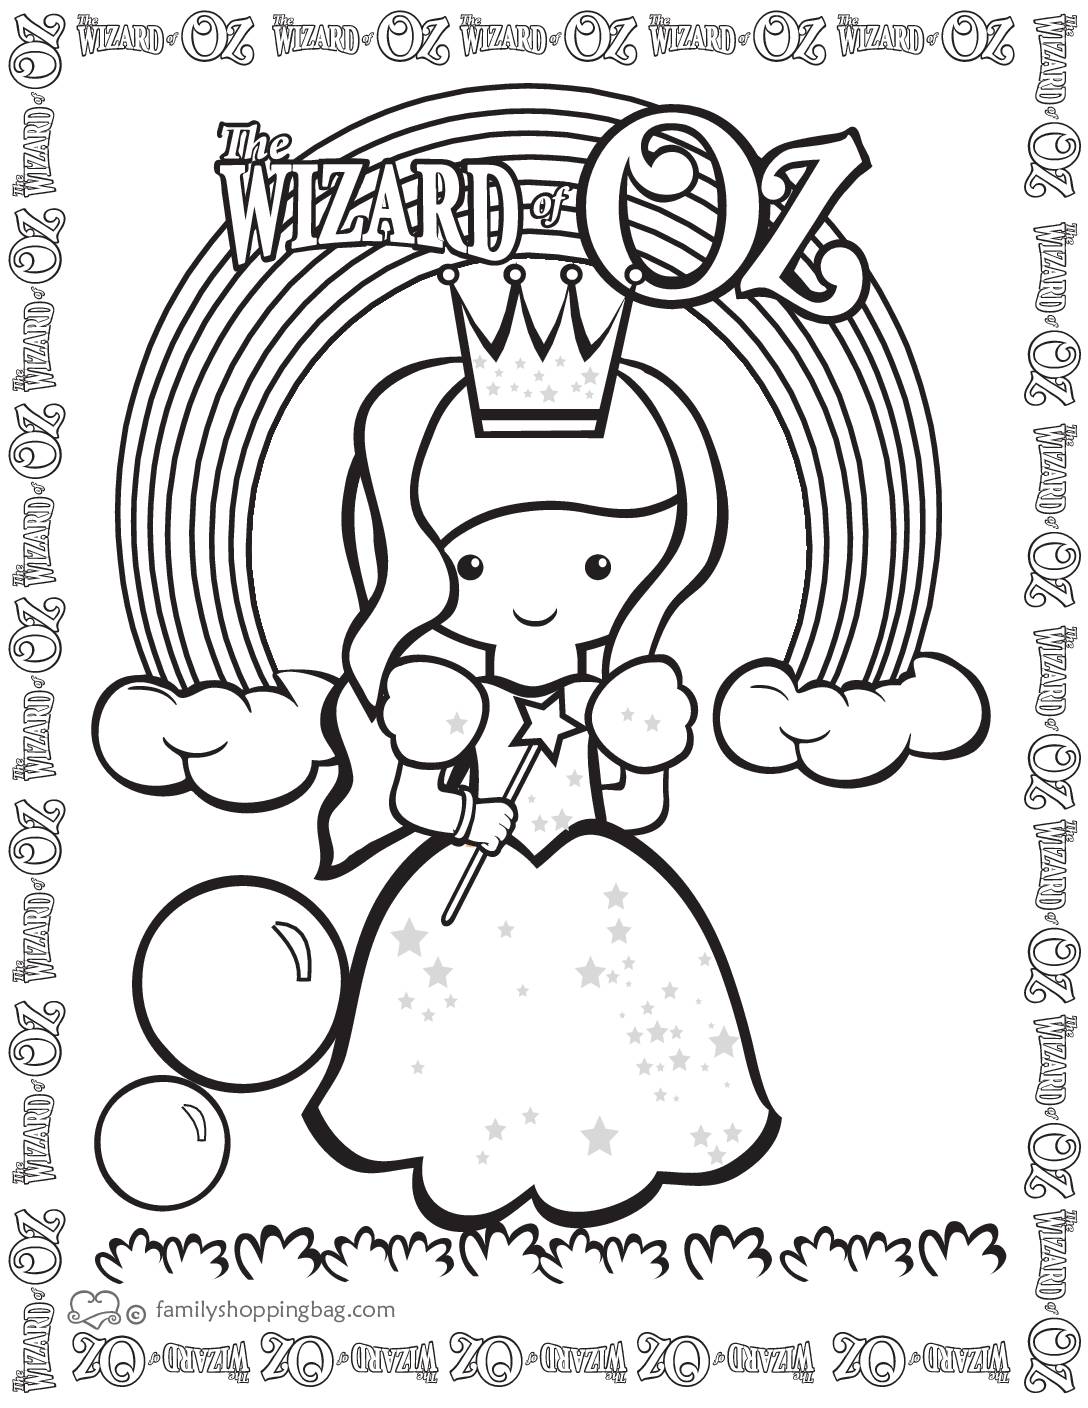 Coloring Page 5 Wizard of Oz Coloring Pages